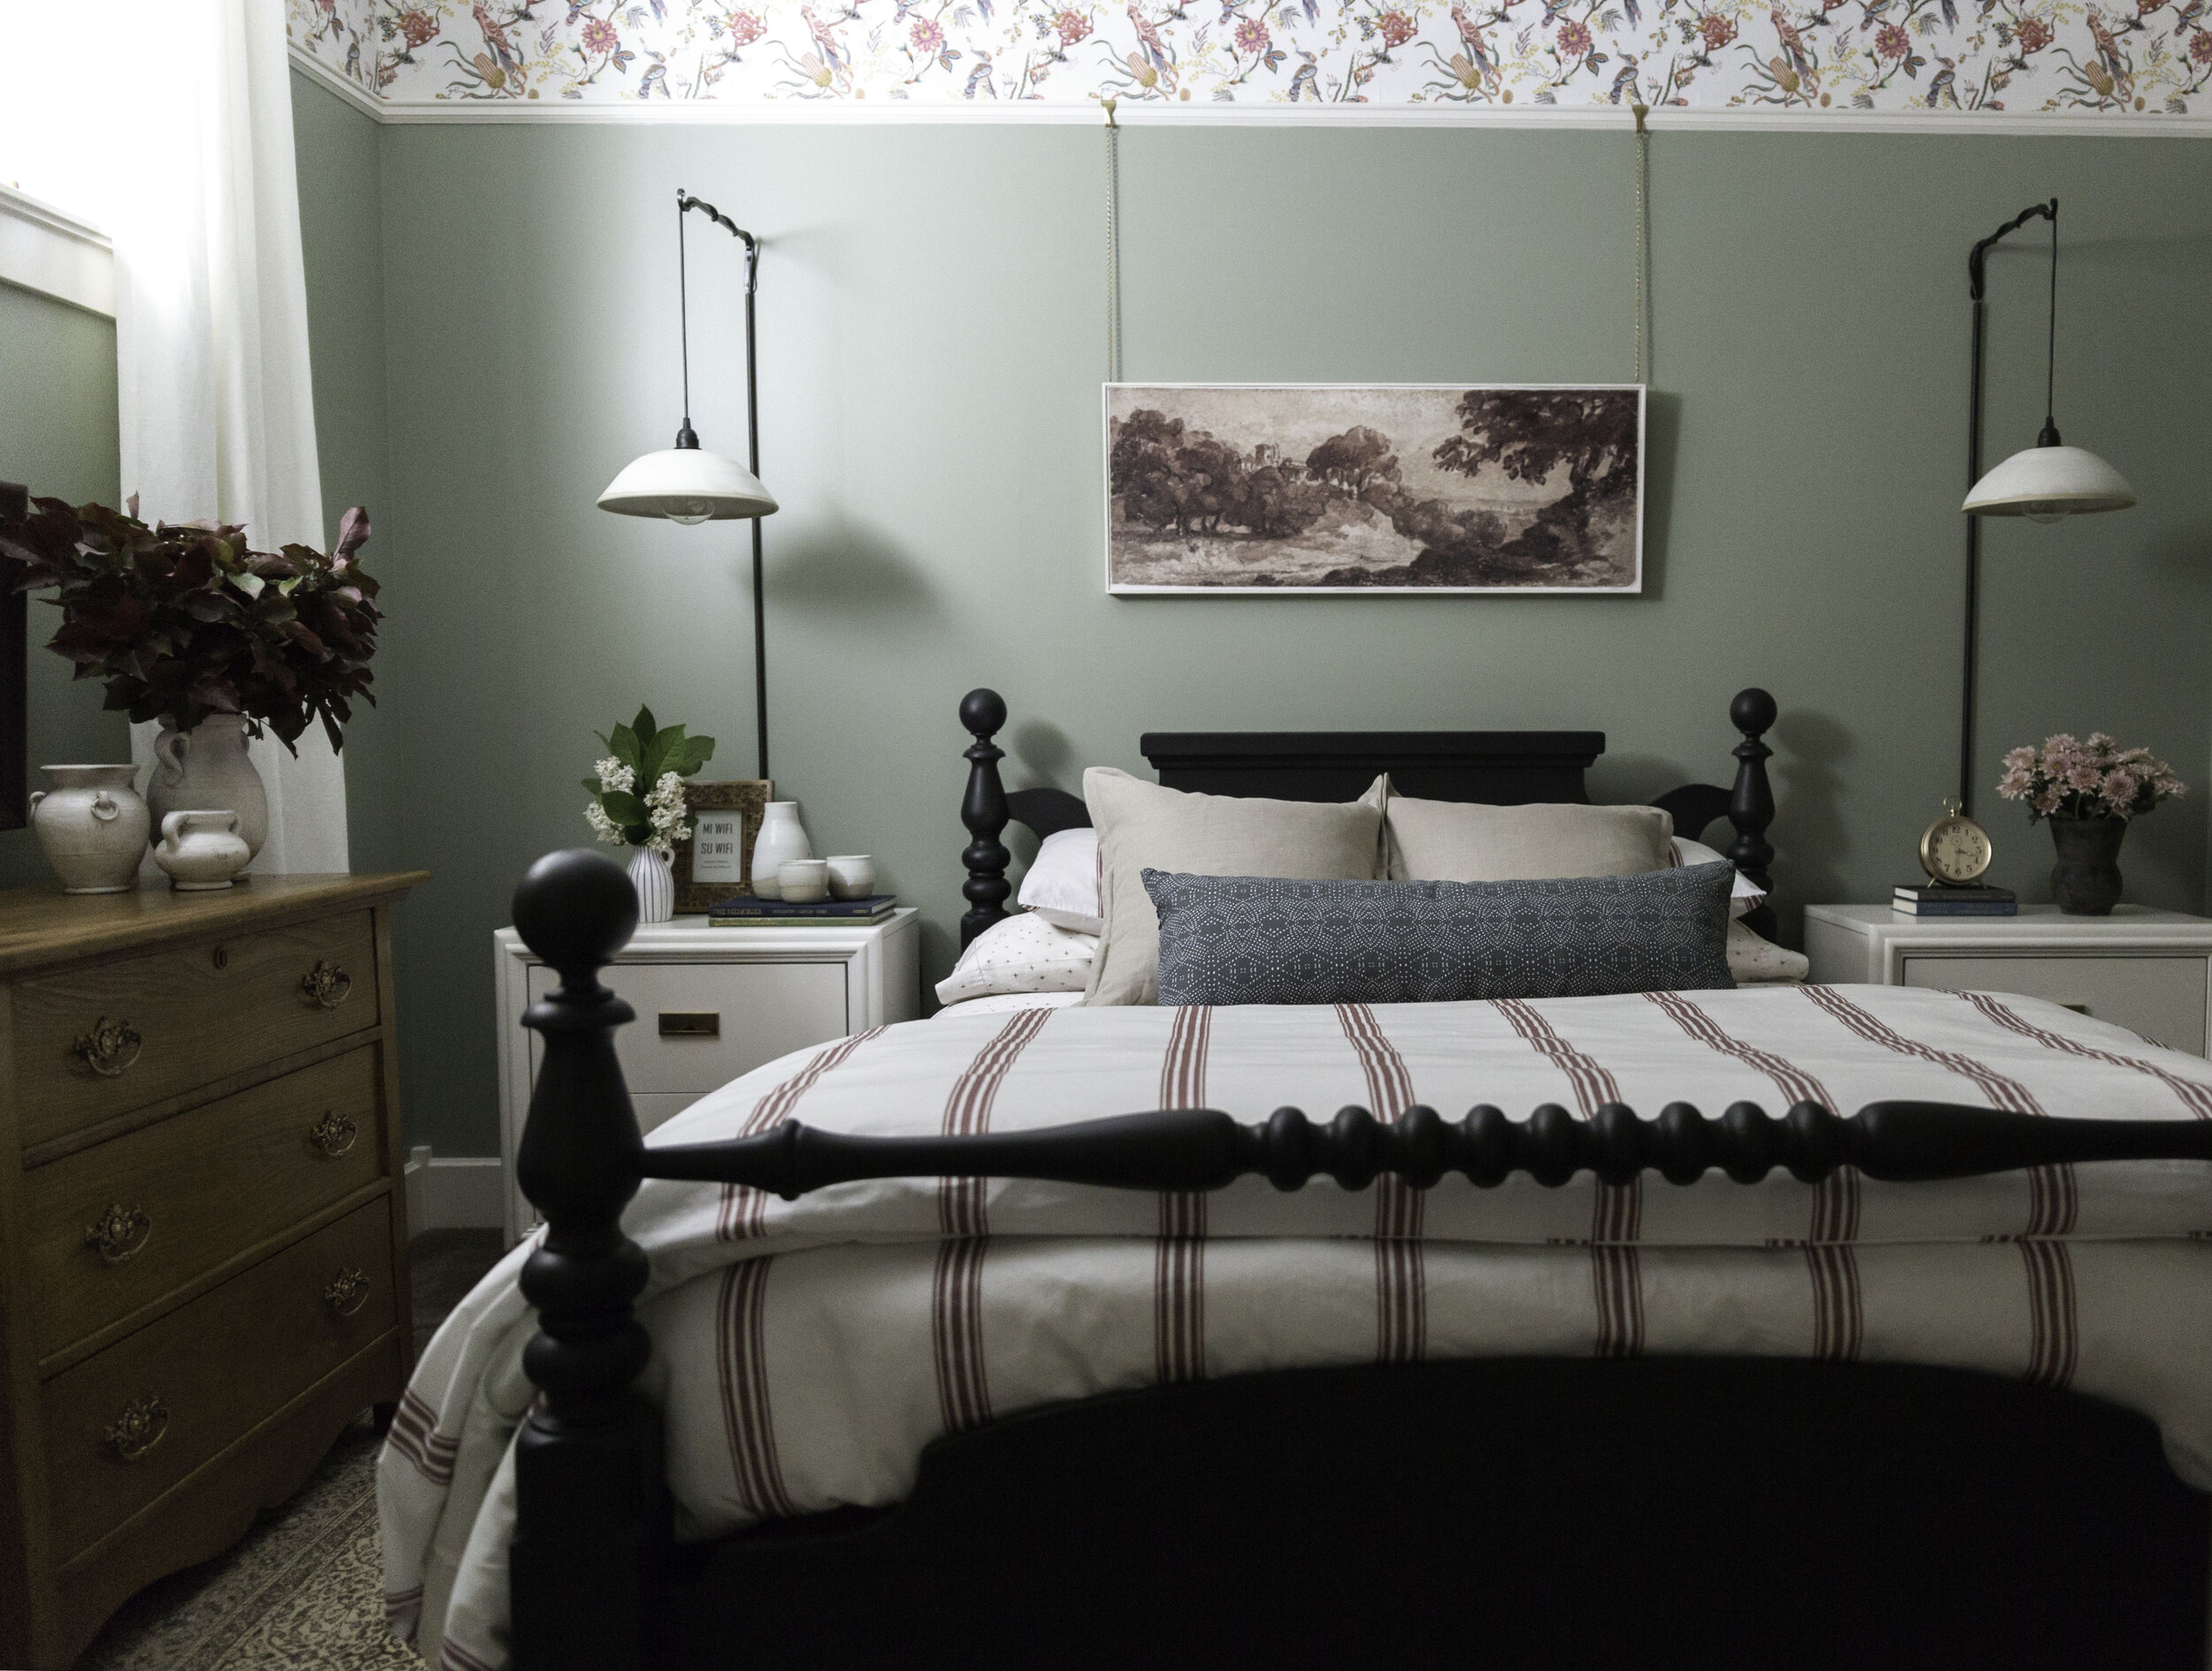 green bedroom with wallpaper at top of wall, red striped bedding, white modern nightstands, hanging ceramic wall sconces, vintage rug and black antique bed and antique wood dresser